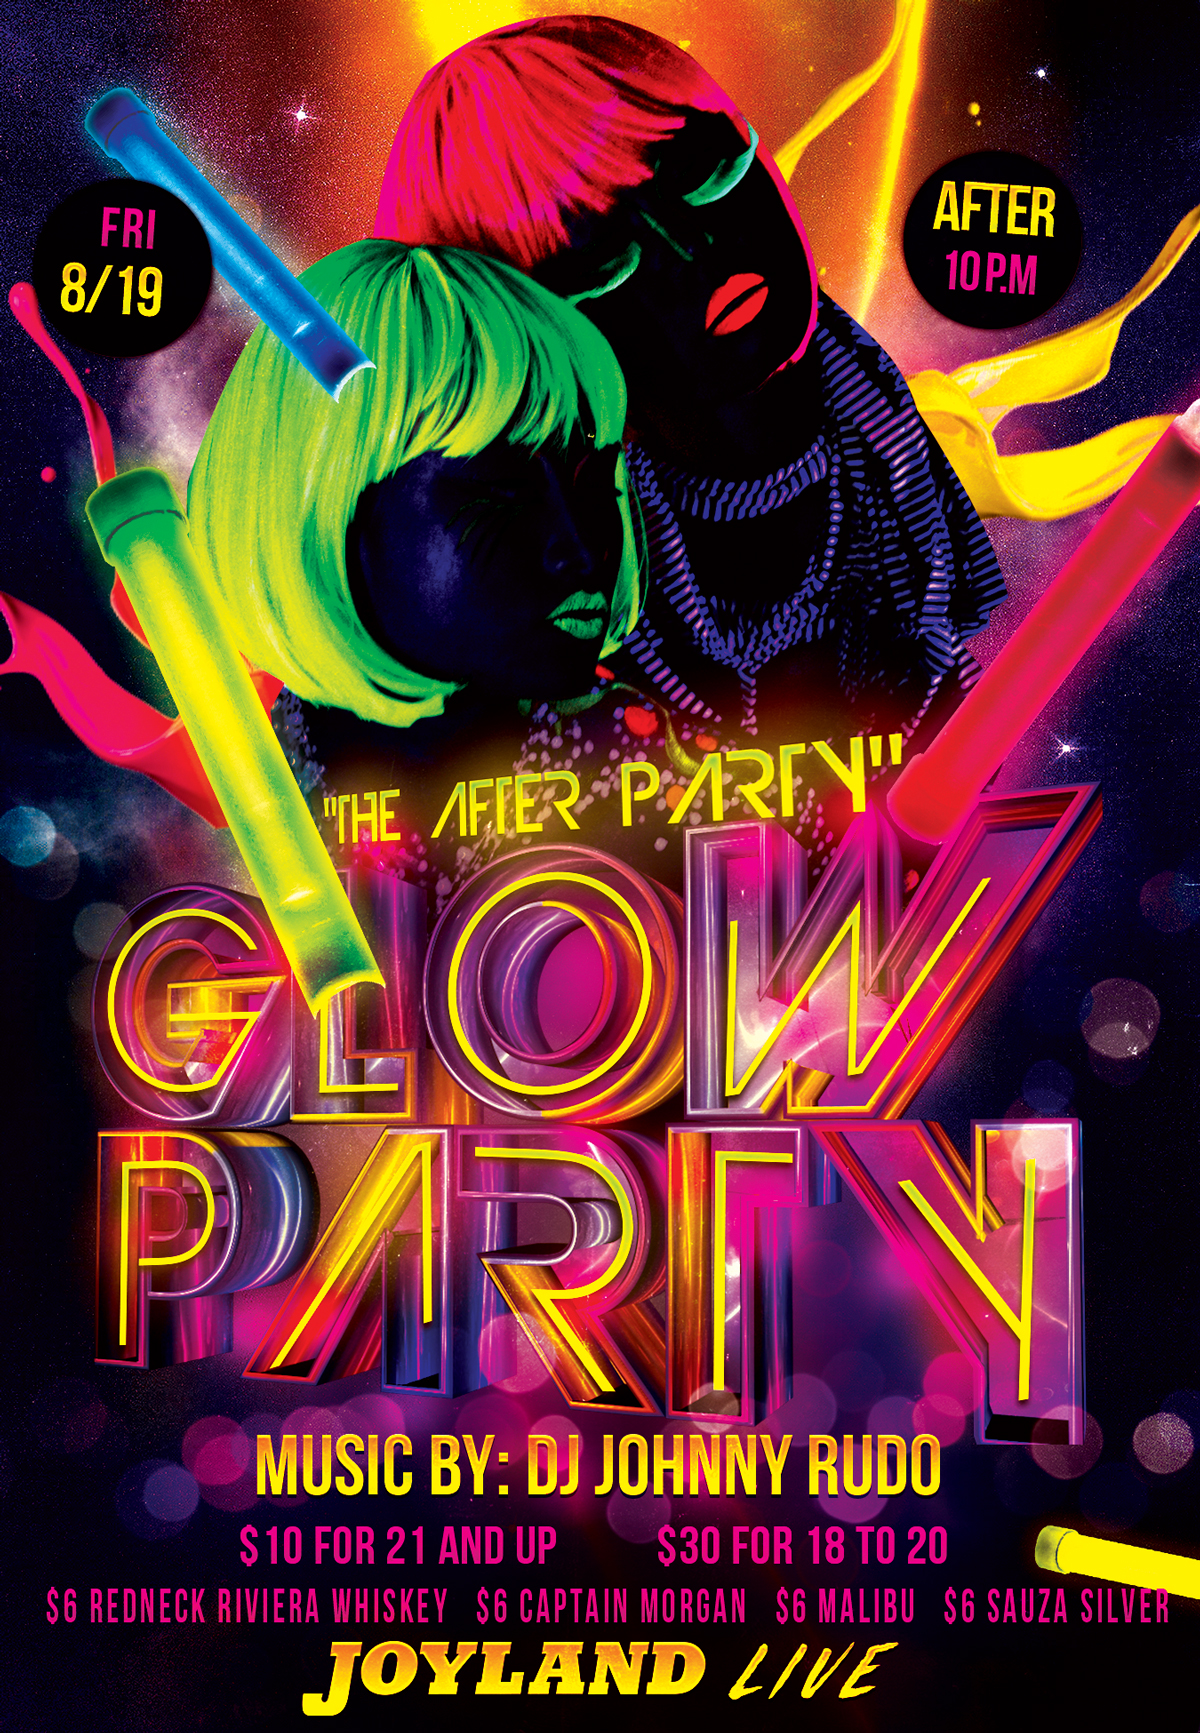 Joyland-Afterparty-Glow-Party-aug19